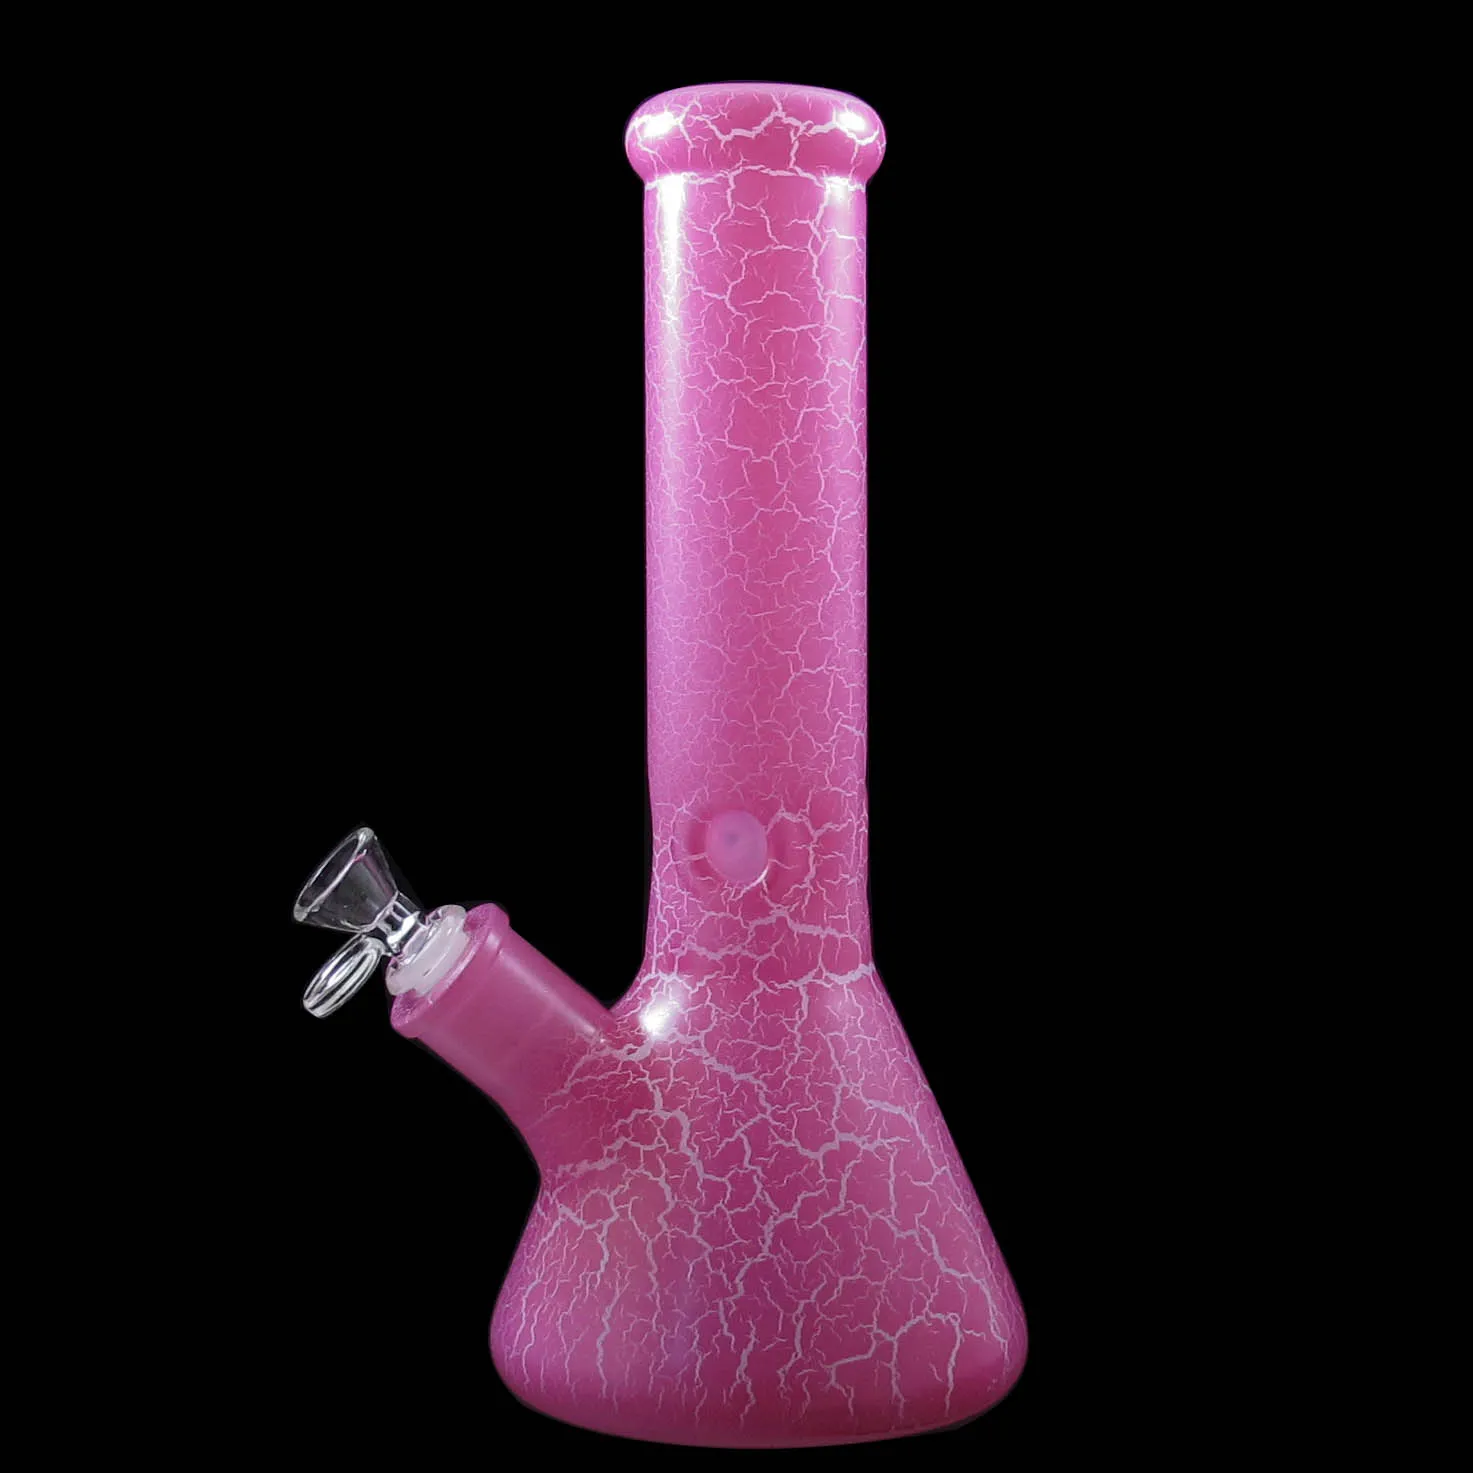 12 Inch 9 MM thick crack line style color Glass BONG smoking bubbler water pipe dab rig PSD-300